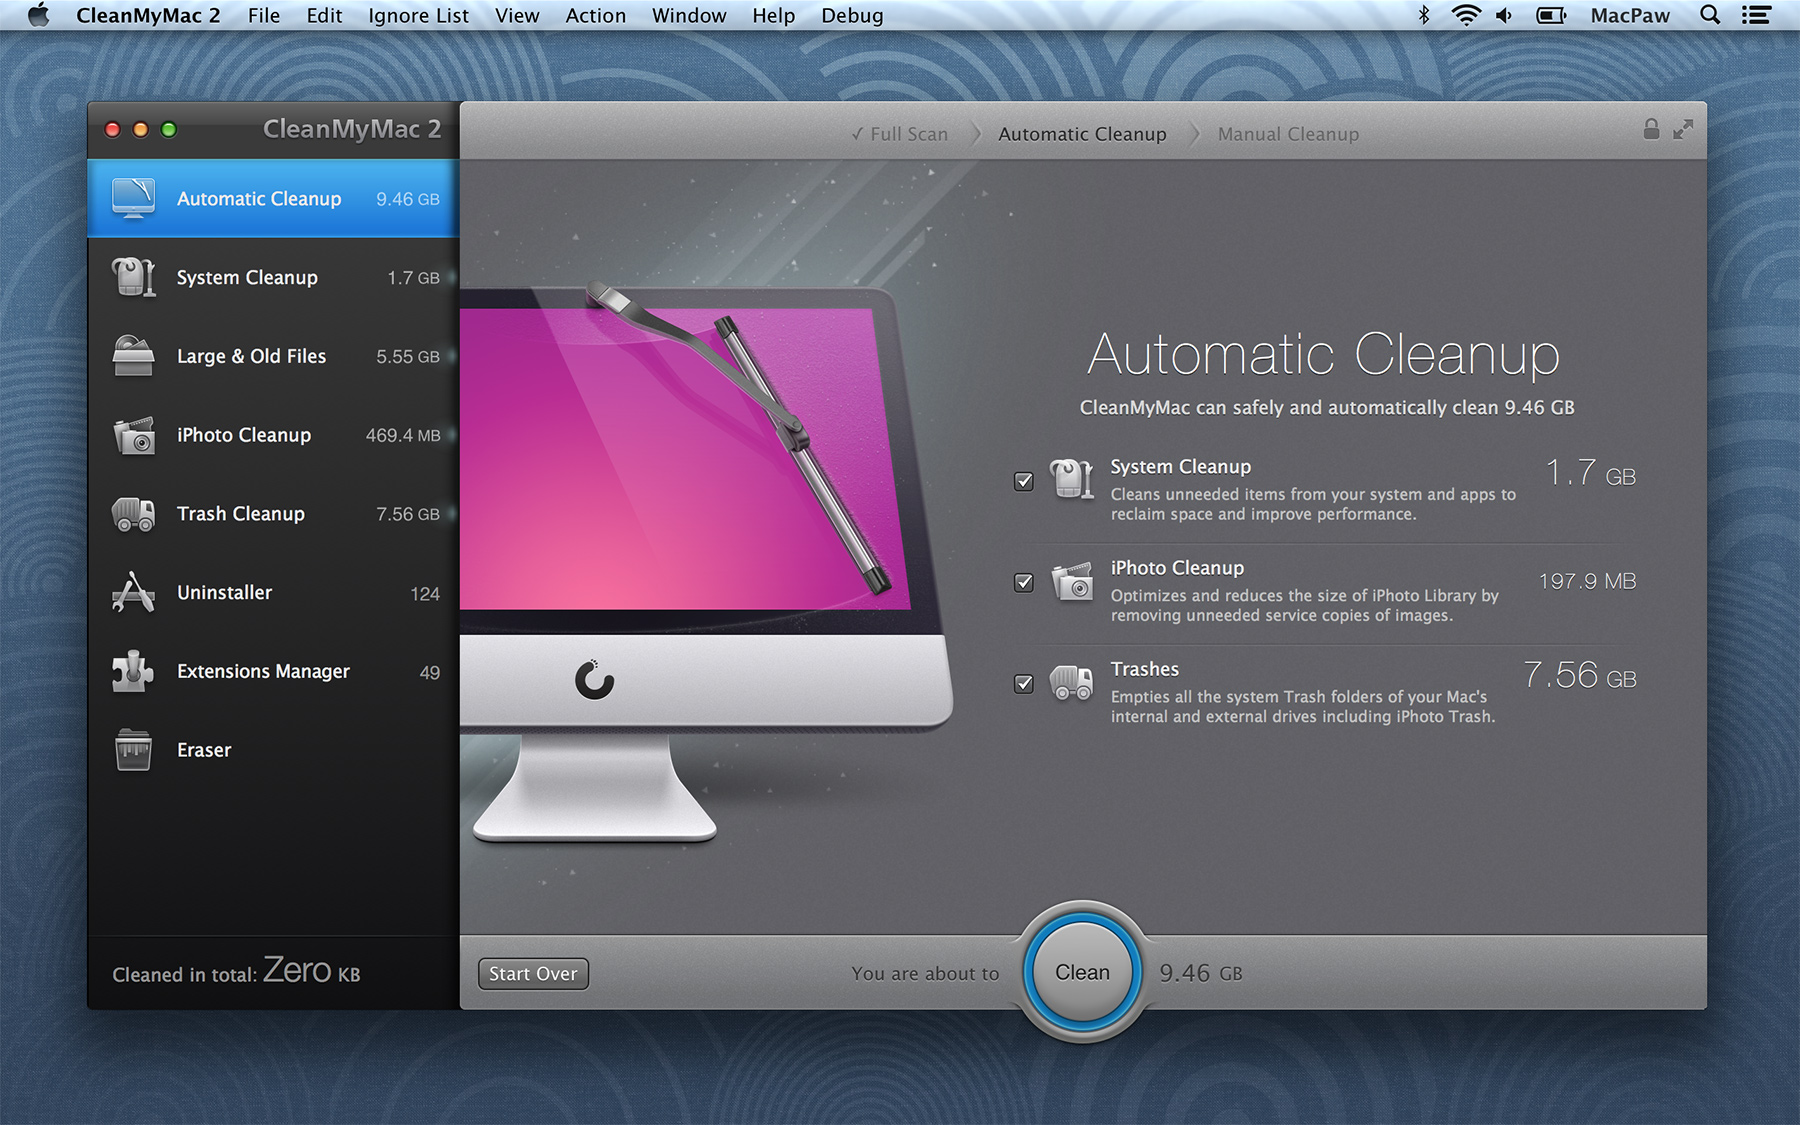 Promotion: compete for three promotional codes from the CleanMyMac 2 app! [atualizado]